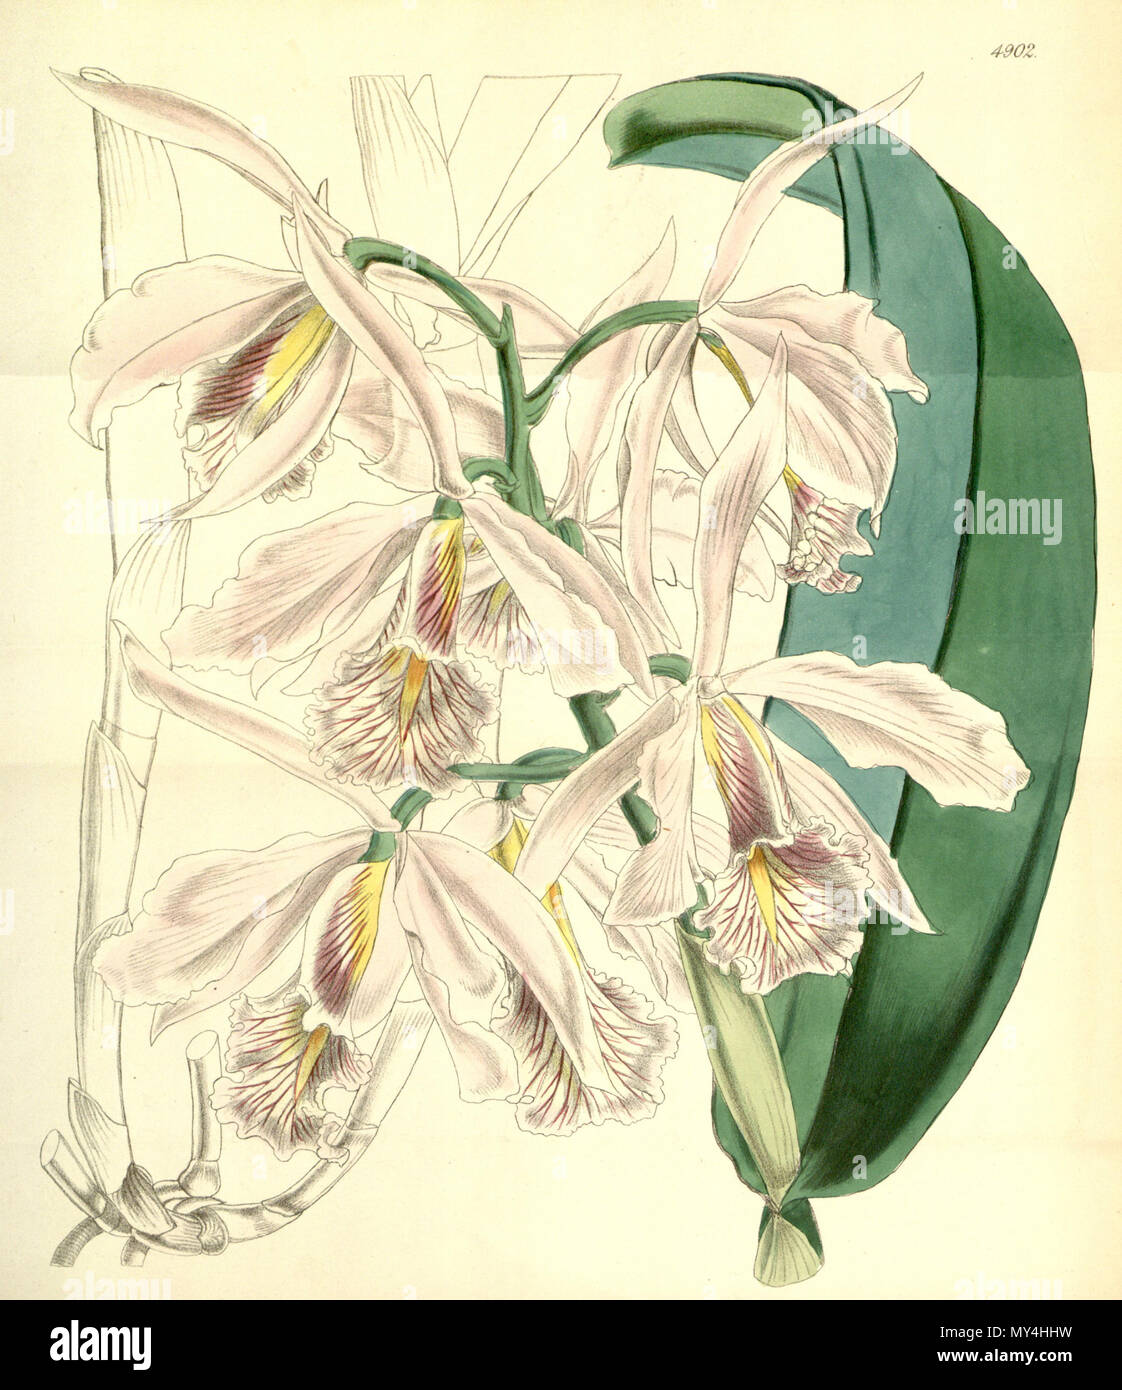 . Illustration of Cattleya maxima . 1856. Probably Walter Hood Fitch (1817-1892) del. et lith. (this plate not signed), description by William Jackson Hooker (1785—1865) 102 Cattleya maxima - Curtis' 82 (Ser. 3 no. 12) pl. 4902 (1856) Stock Photo